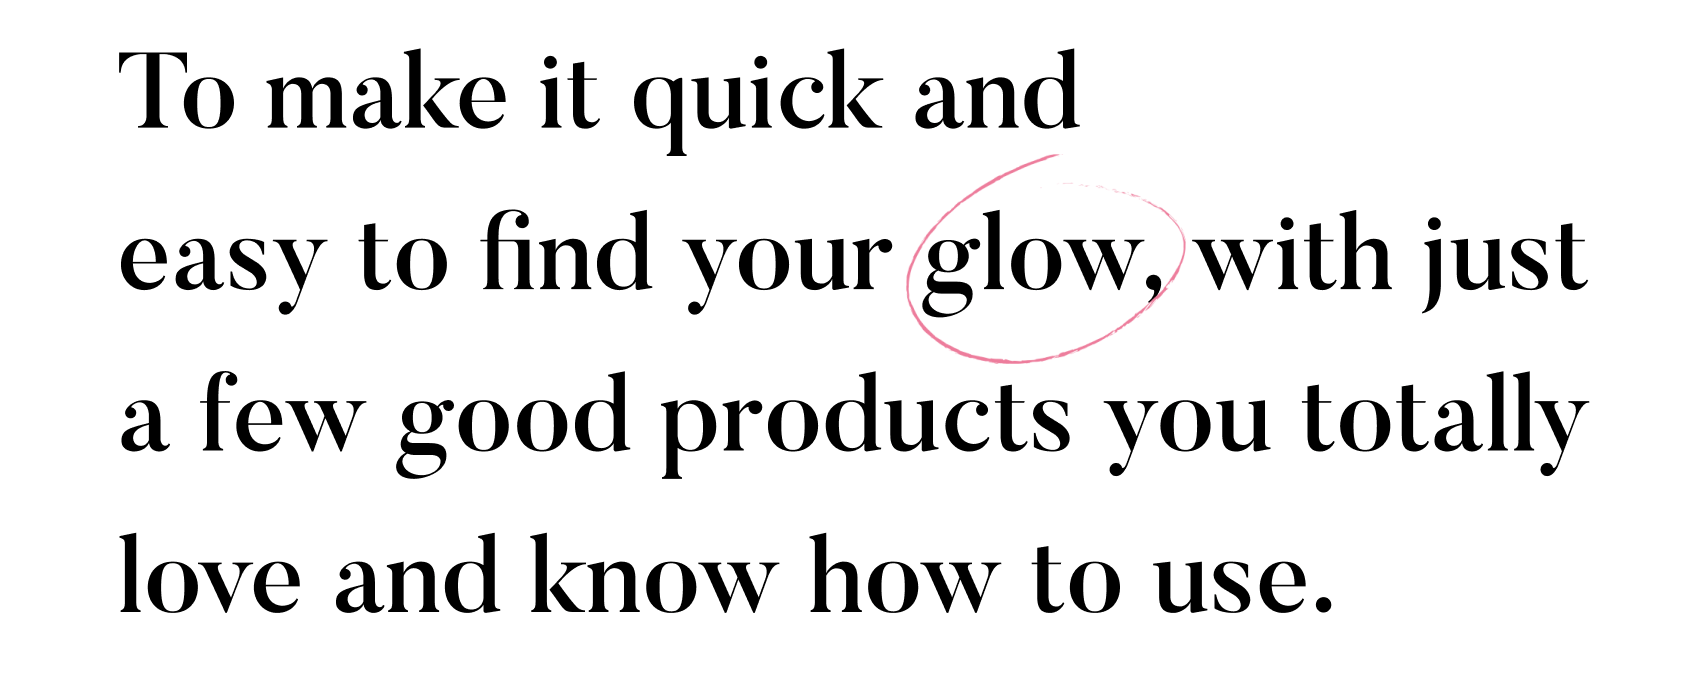 To make it quick and easy to find your glow, with just a few good products you totally love and know how to use.